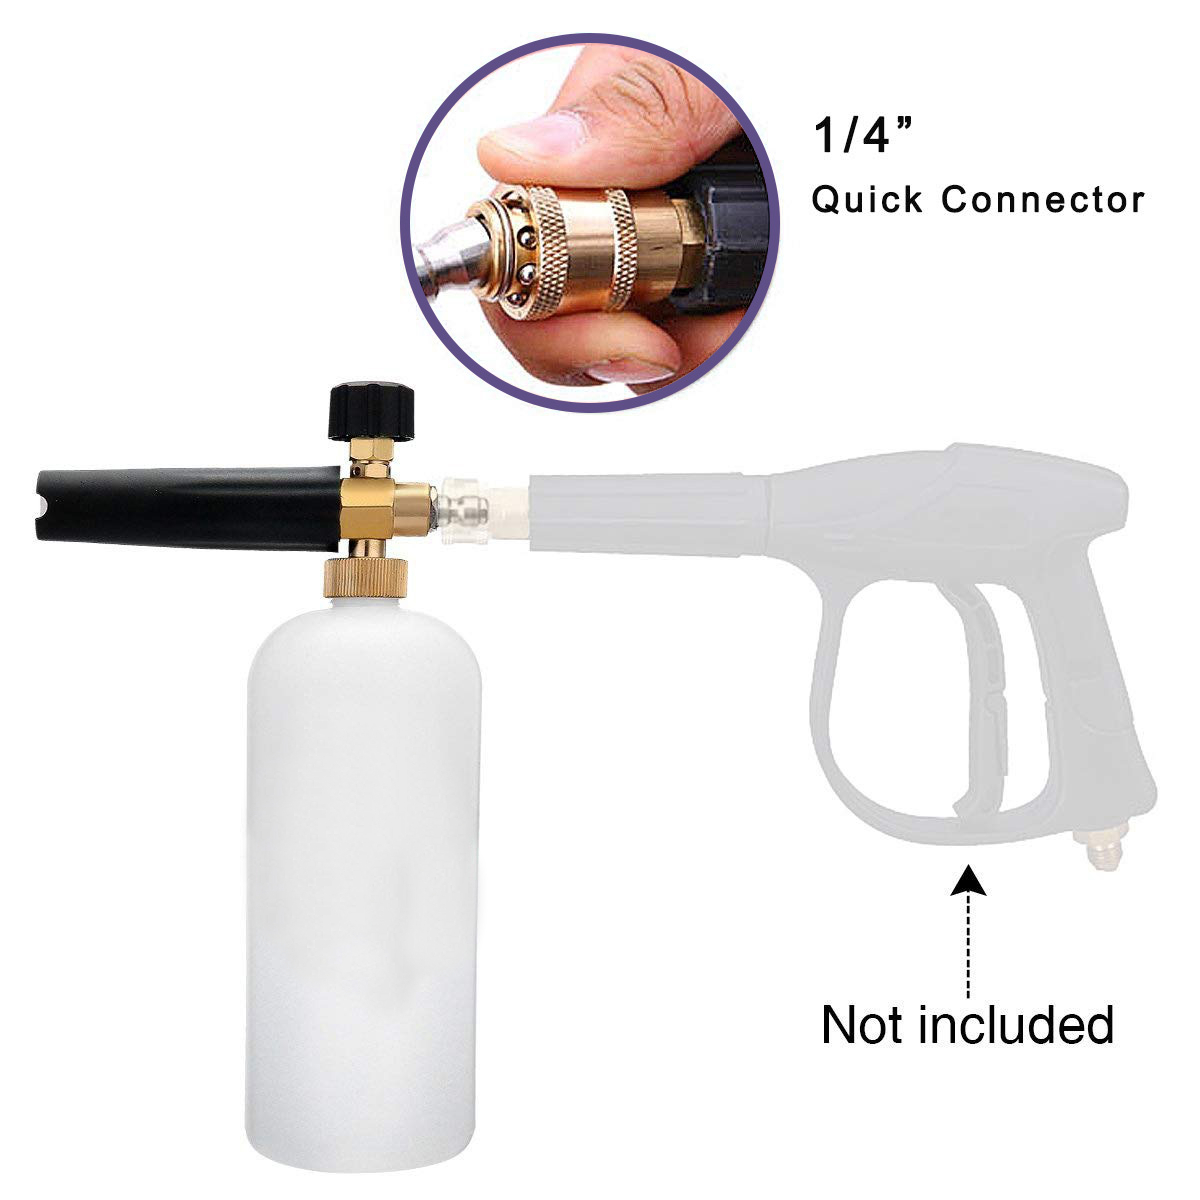 1L Lance Foam Spray Tool Soap Cannon For High Pressure Washer w/5x Nozzles